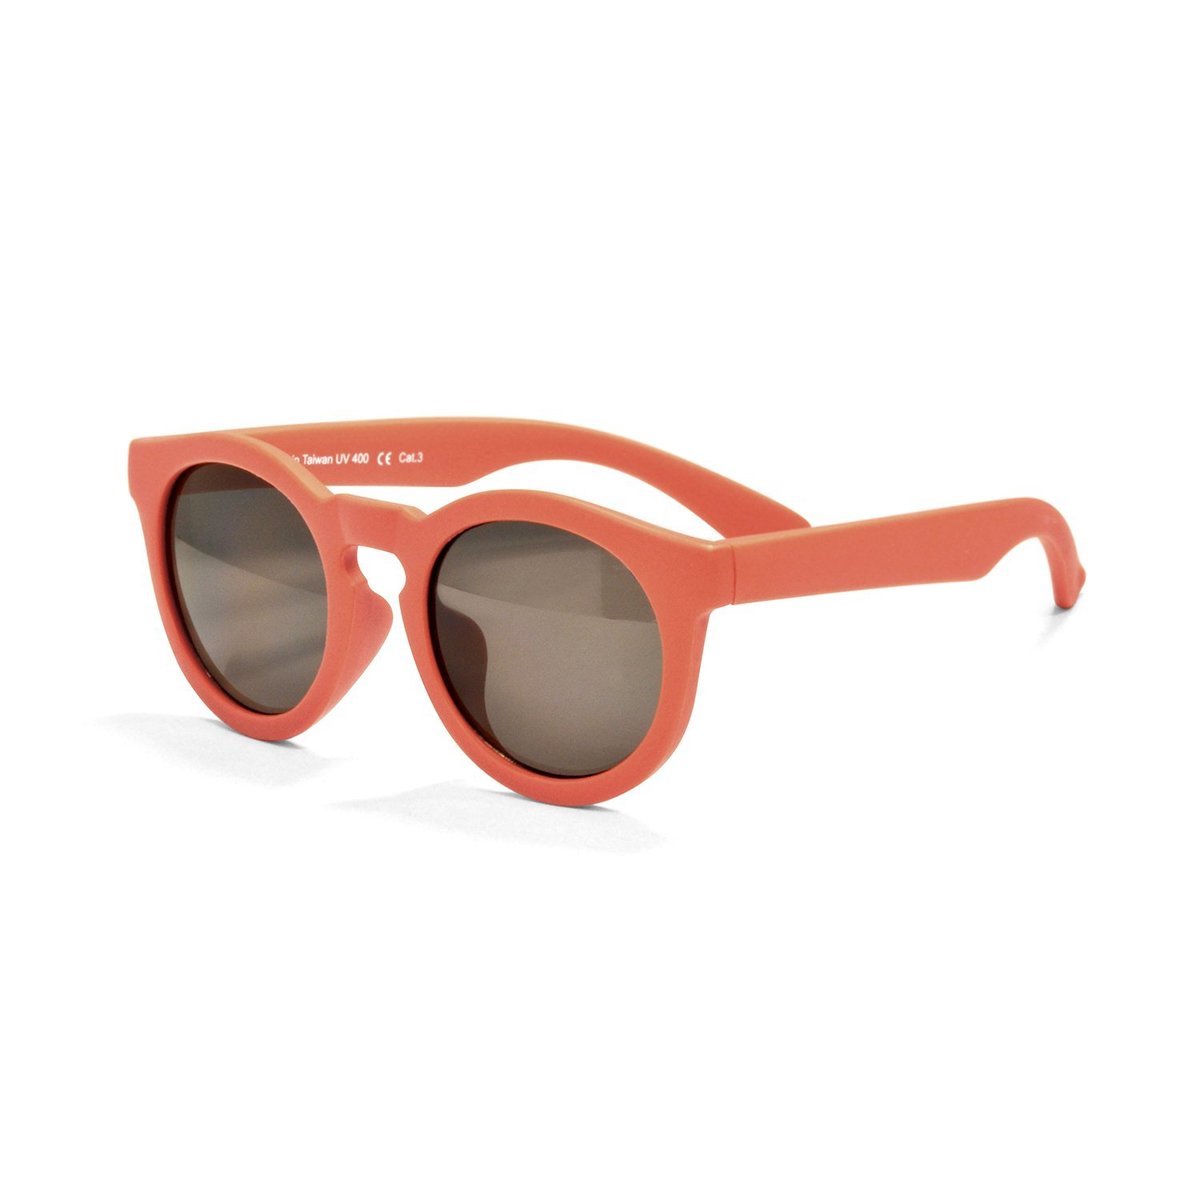 Real Shades - UV-zonnebril voor kinderen - Chill - Canyon Rood - maat Onesize (2-4yrs)